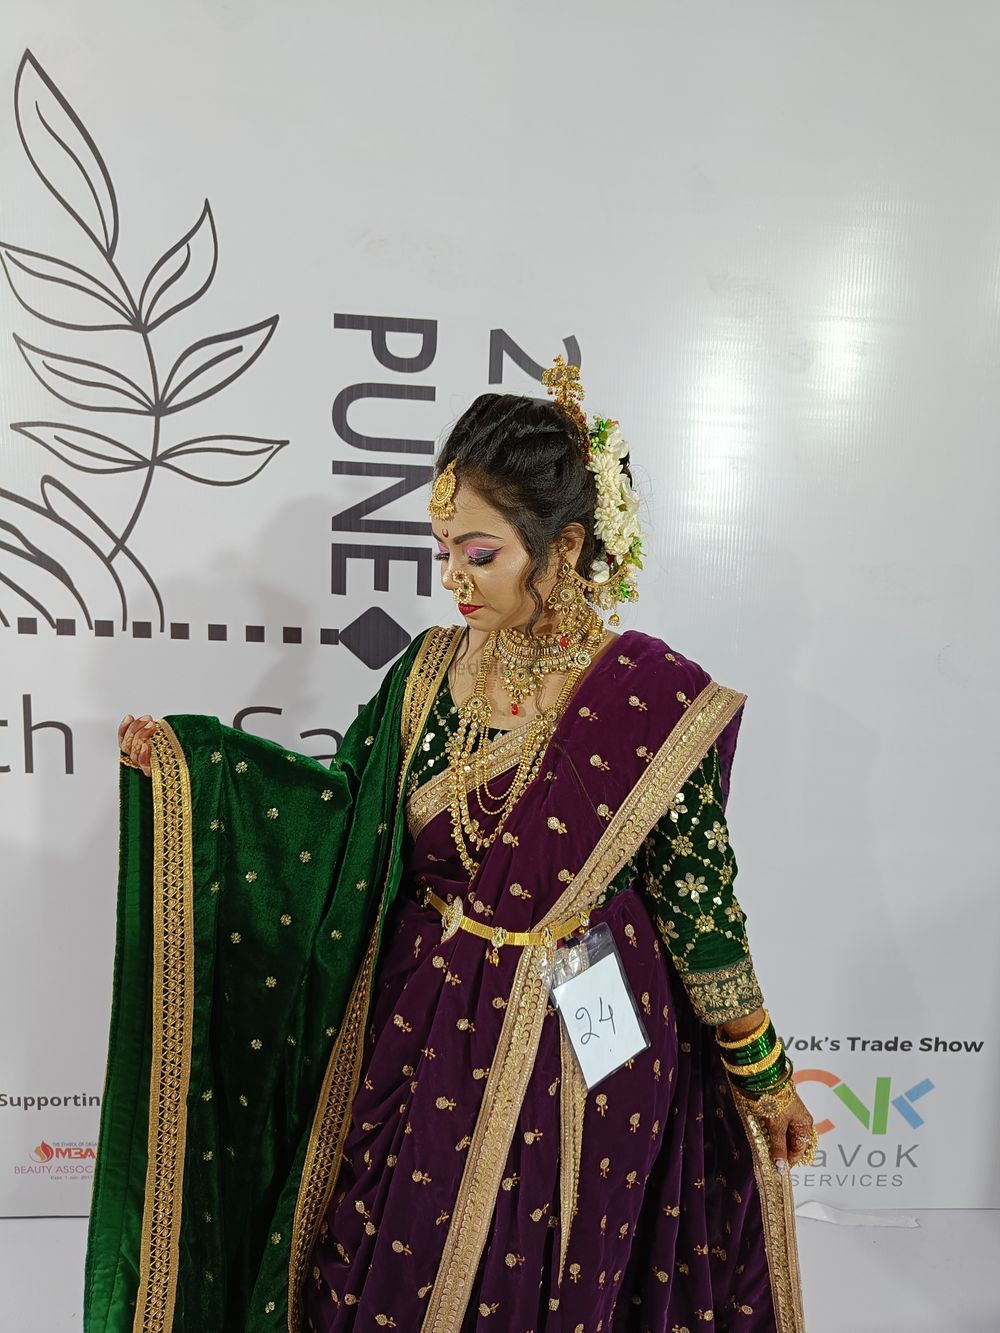 Photo From peshwai bride - By Nermalla Makeover